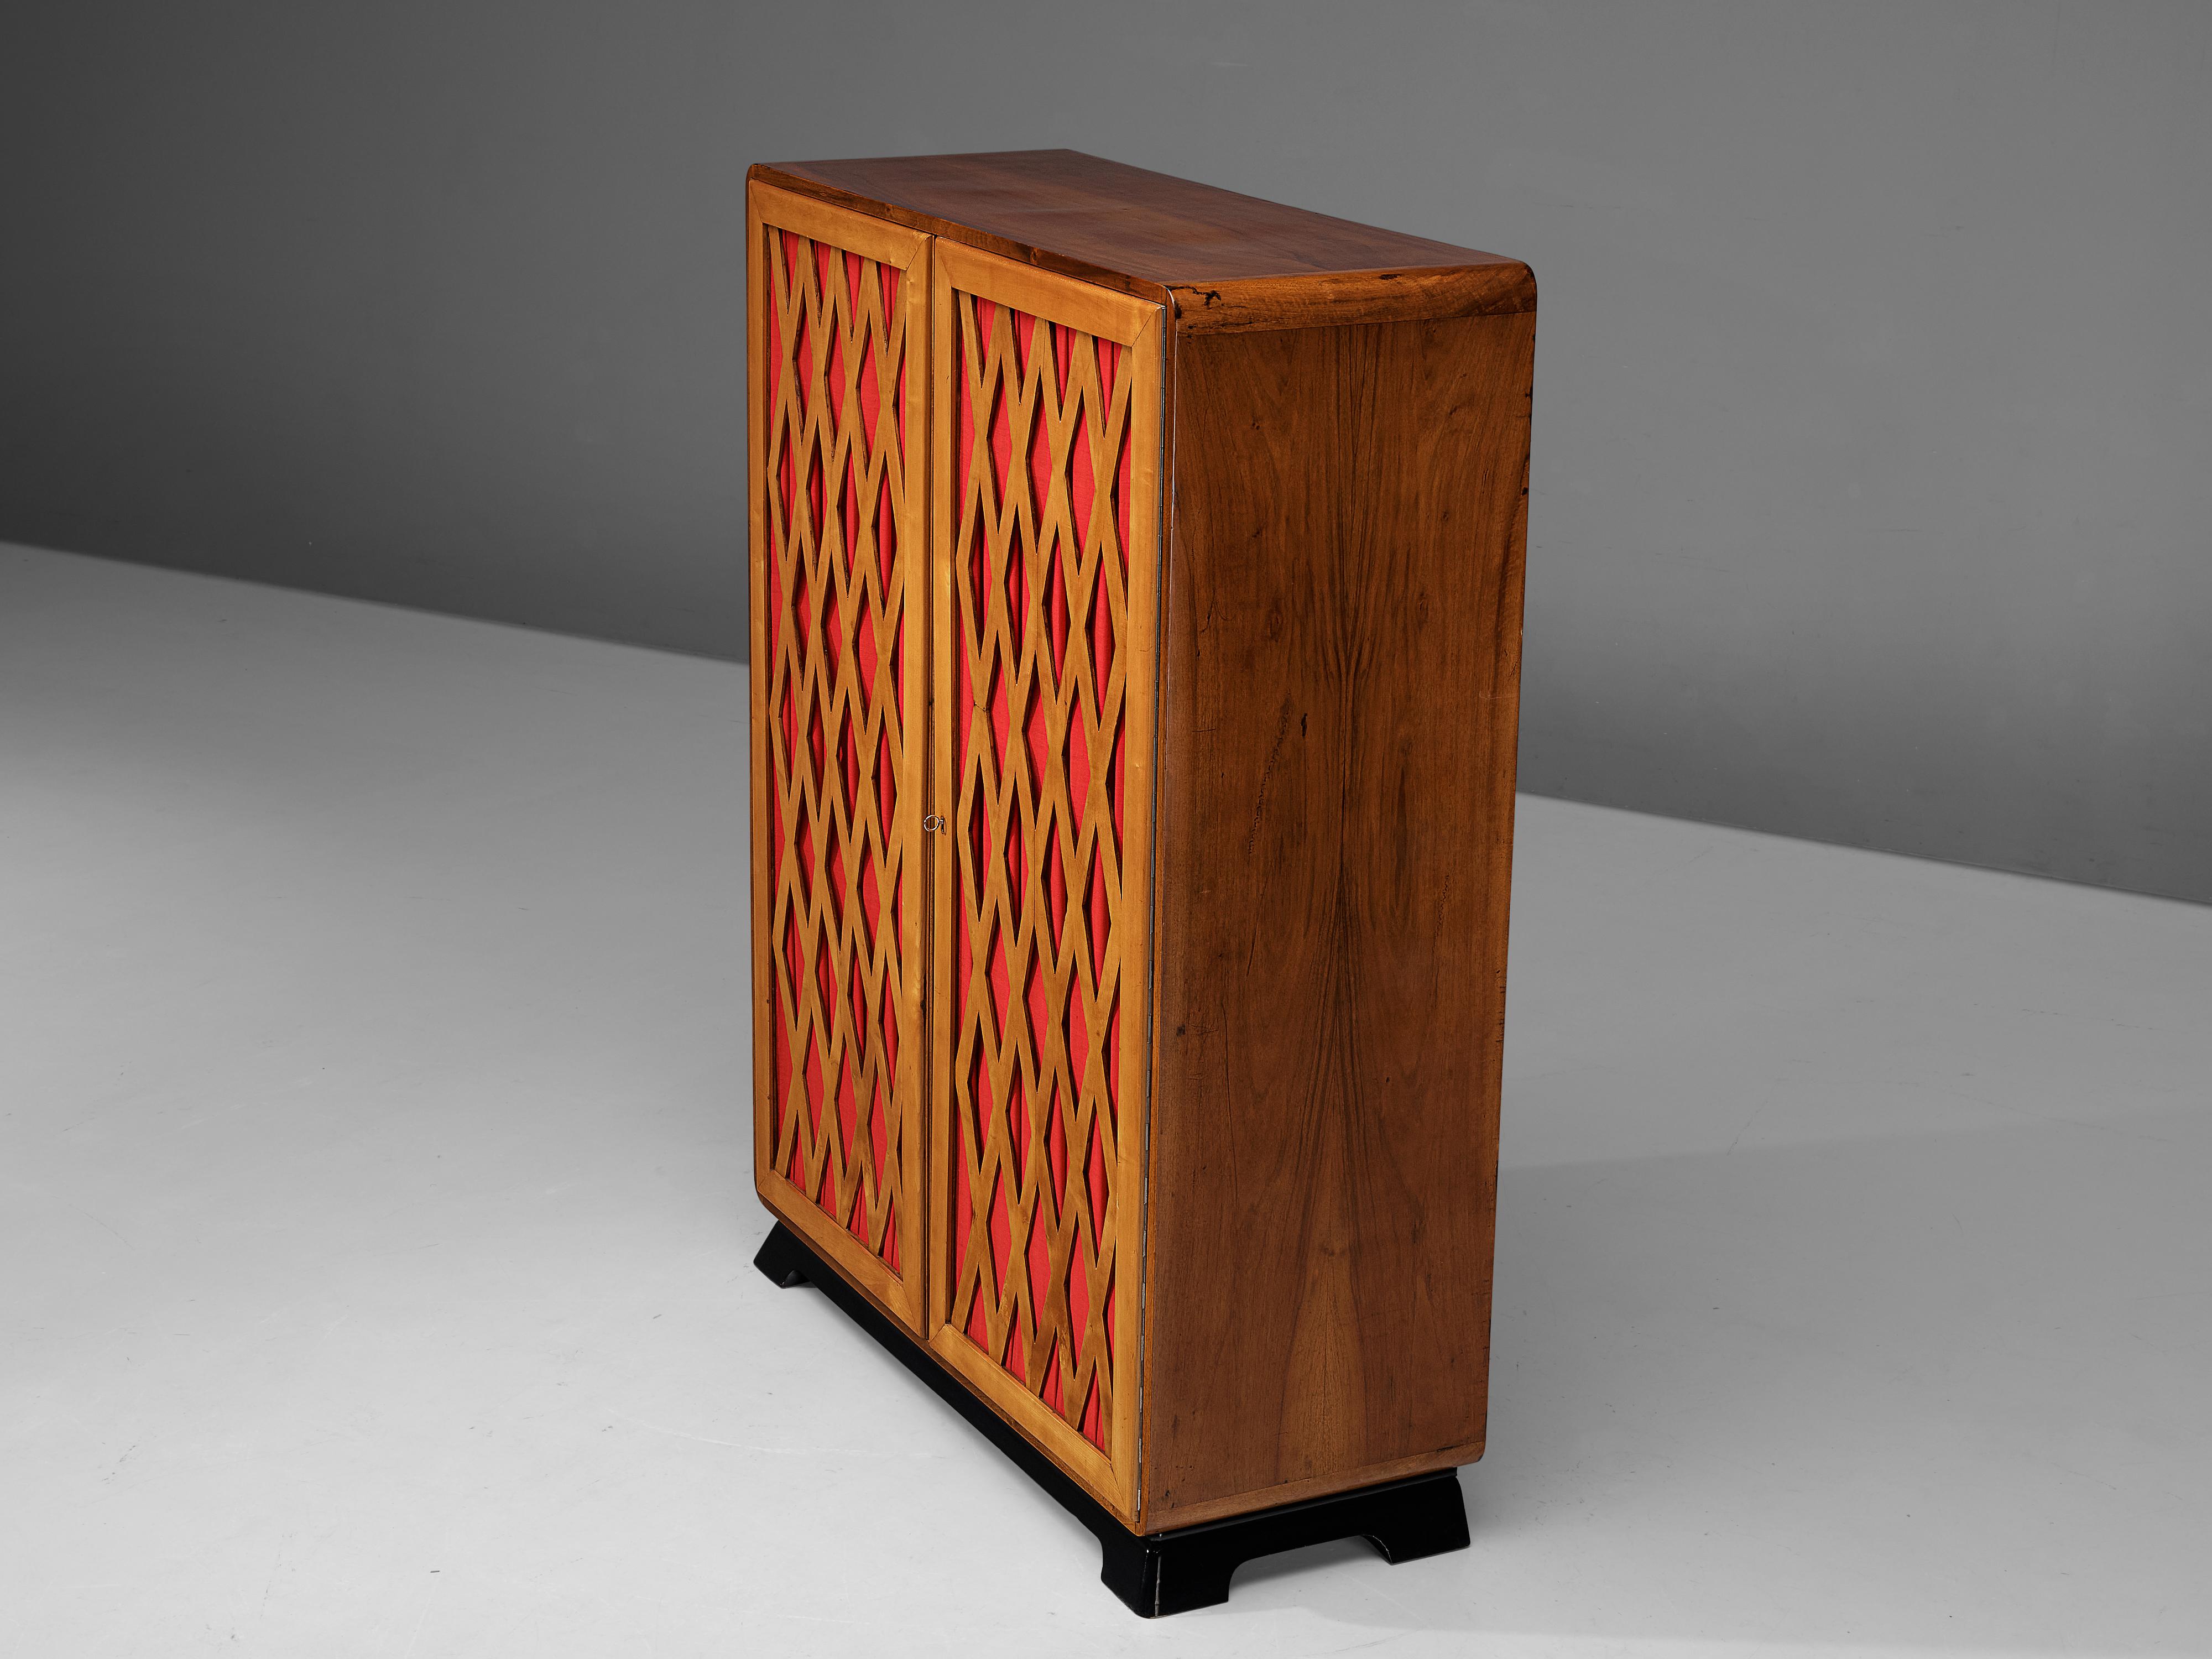 Italian Art Deco Highboard in Walnut and Red Upholstery  1